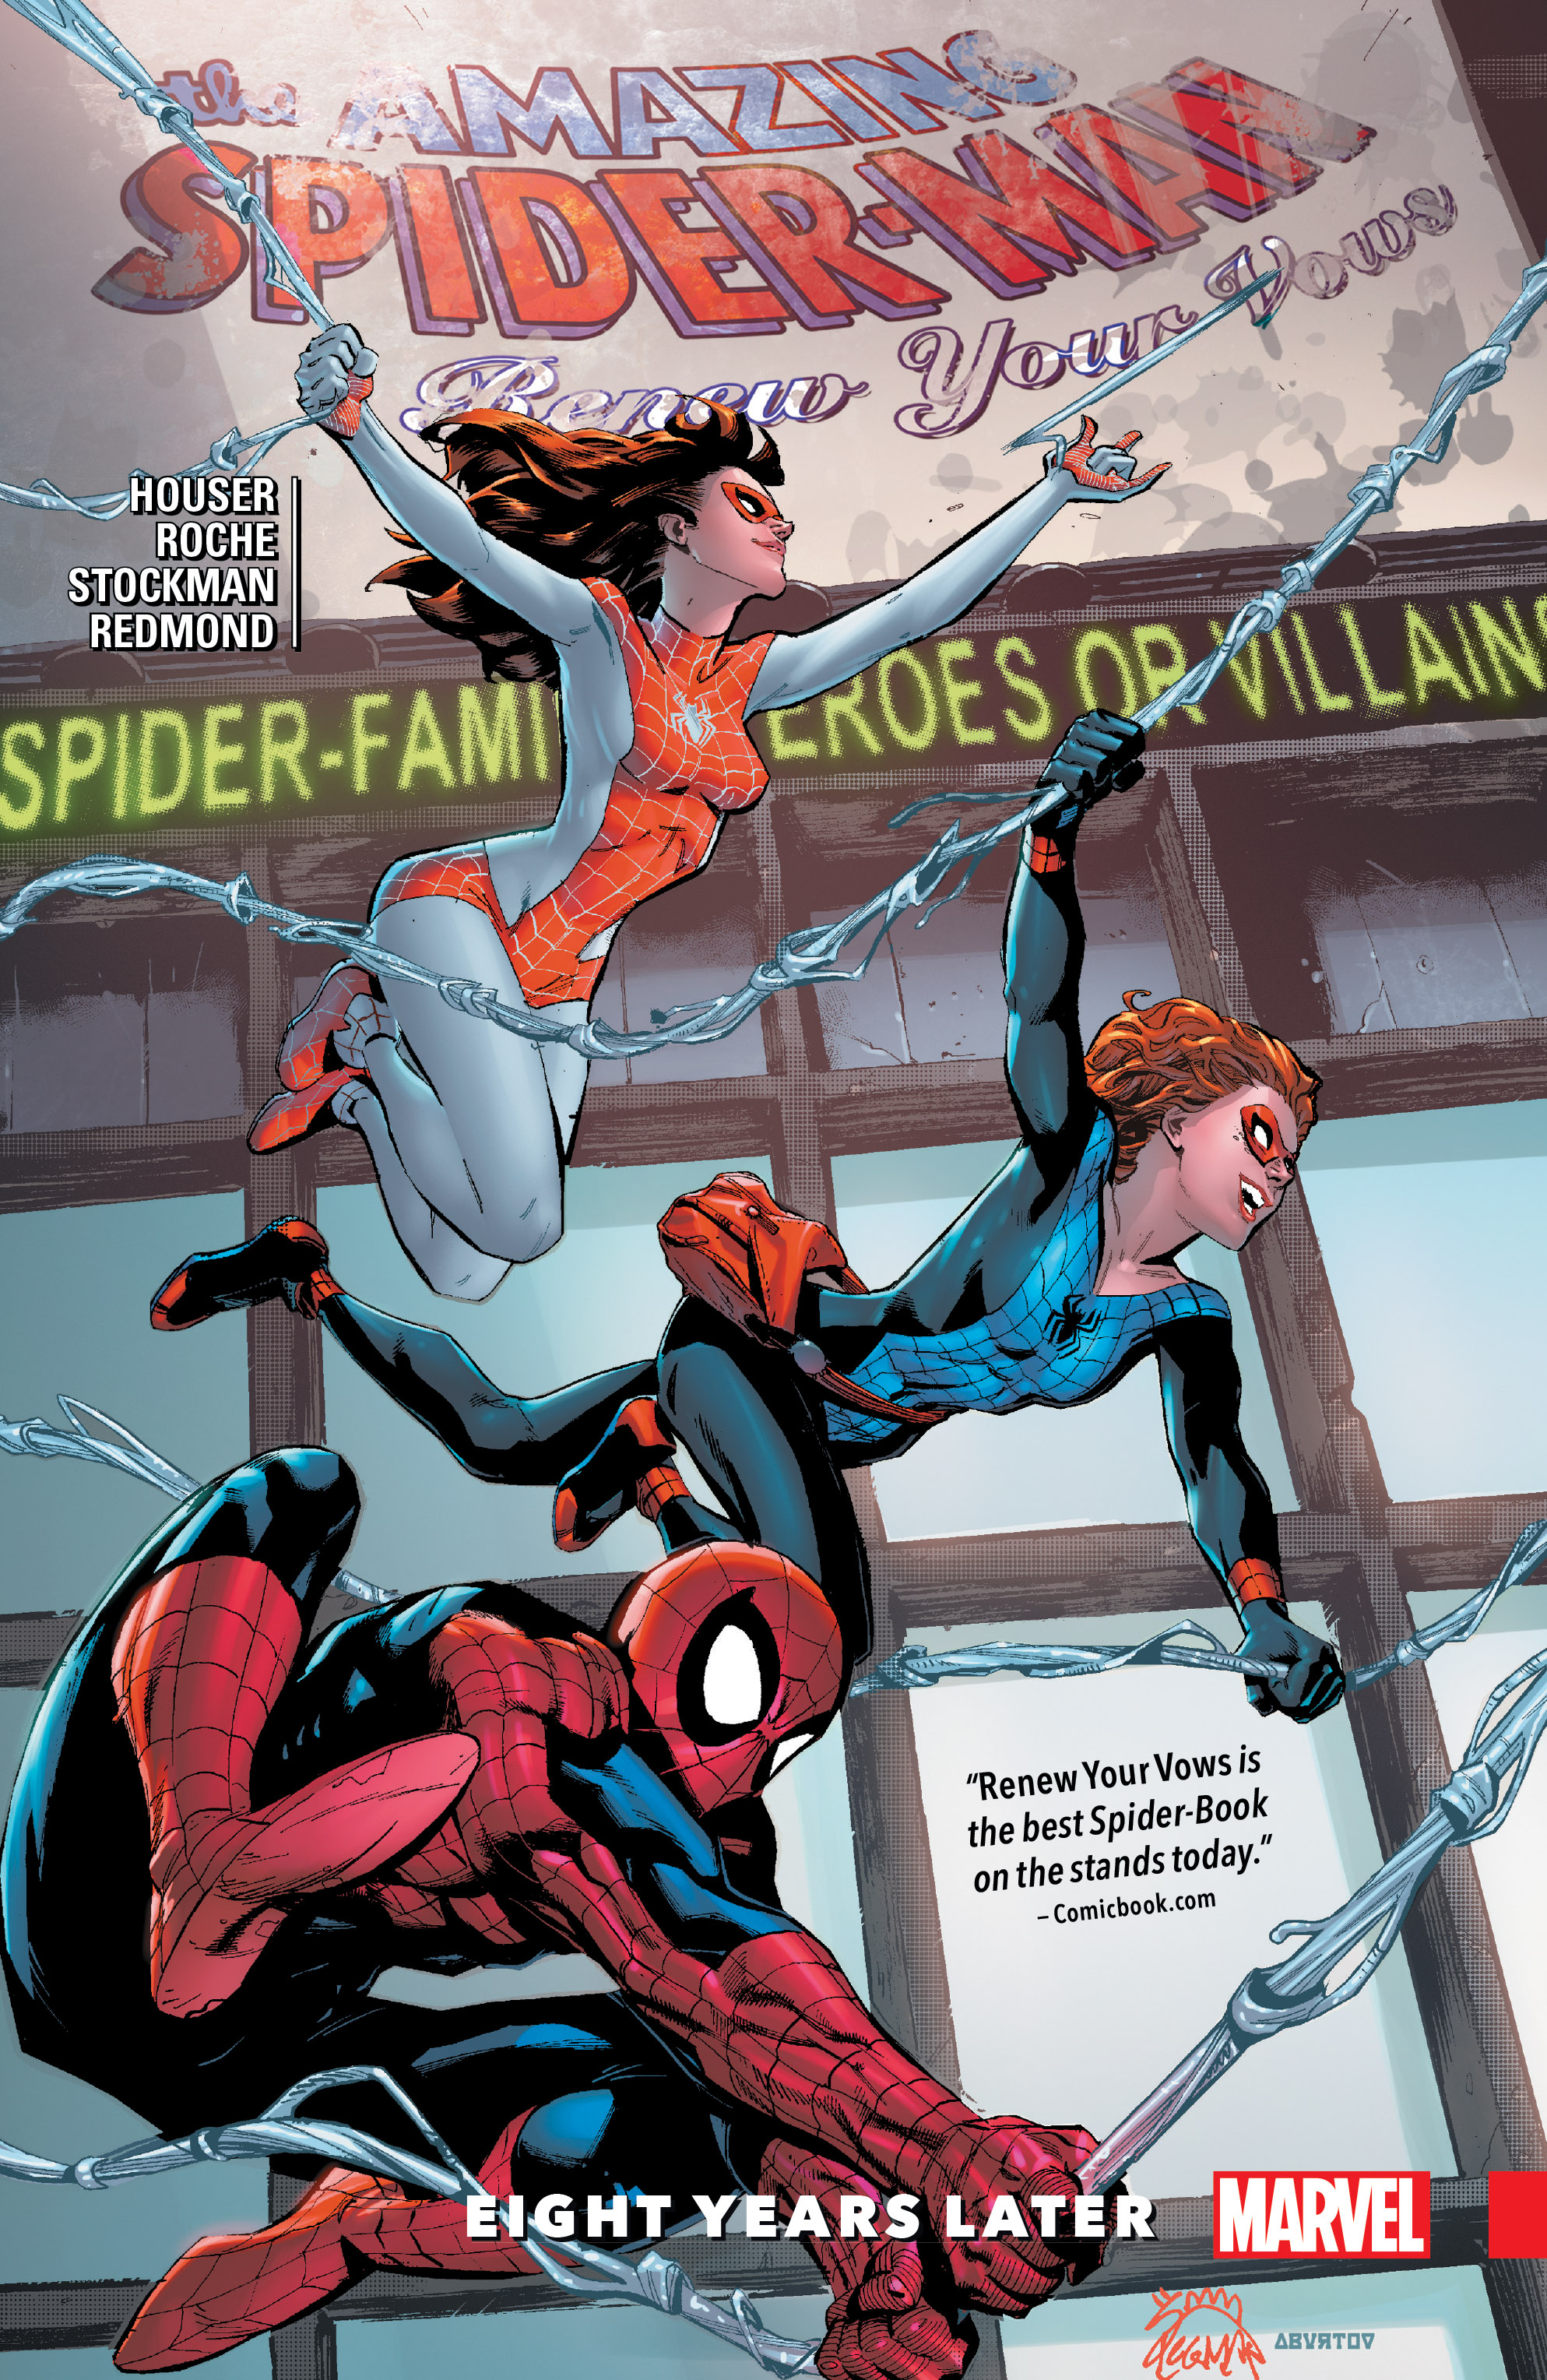 Amazing Spider-Man: Renew Your Vows Vol. 3 - Eight Years Later (Trade Paperback)